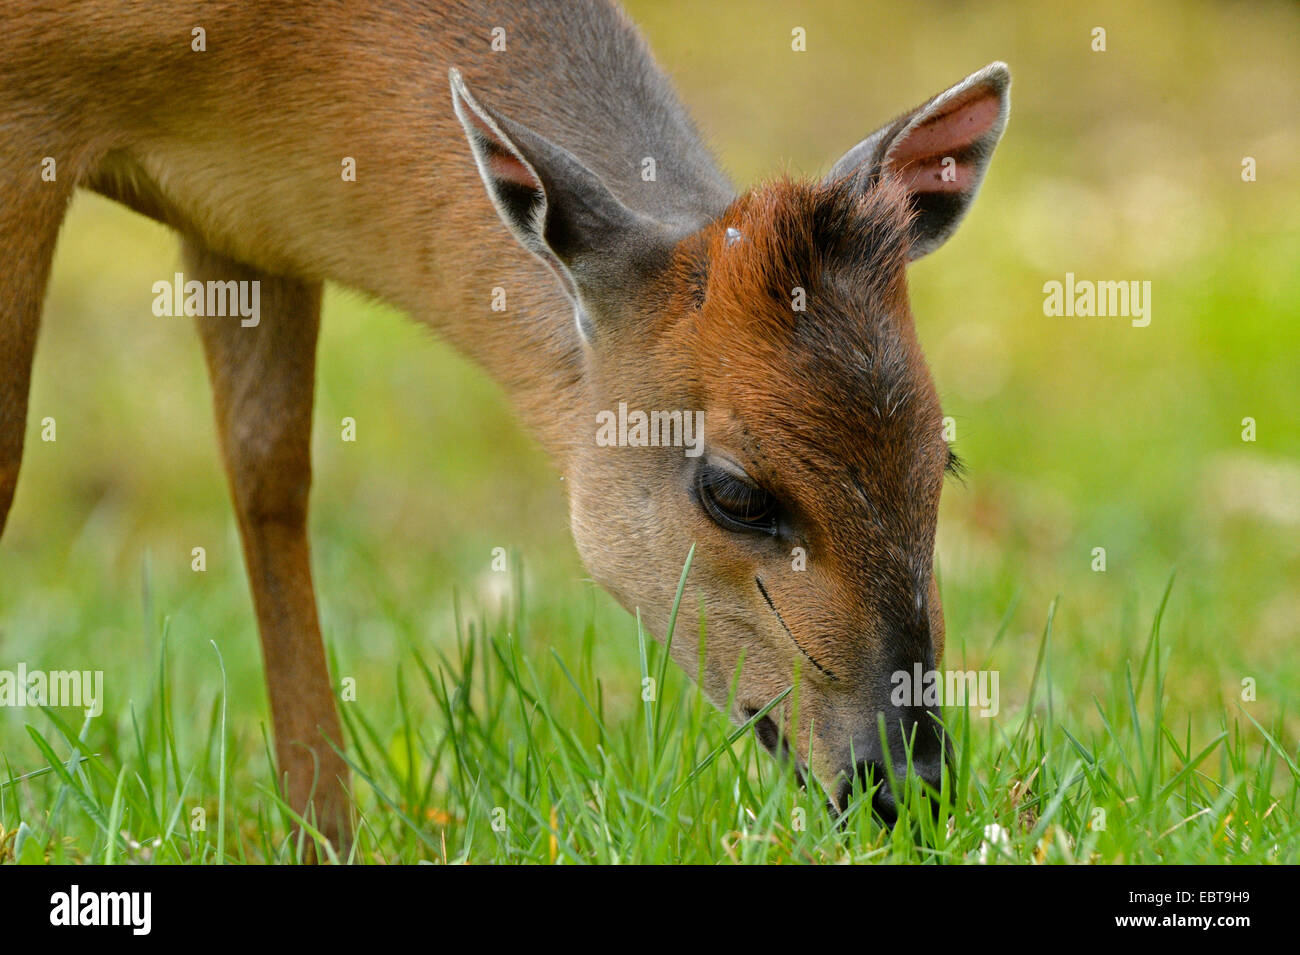 red forest duiker (Cephalophus natalensis), grazing Stock Photo